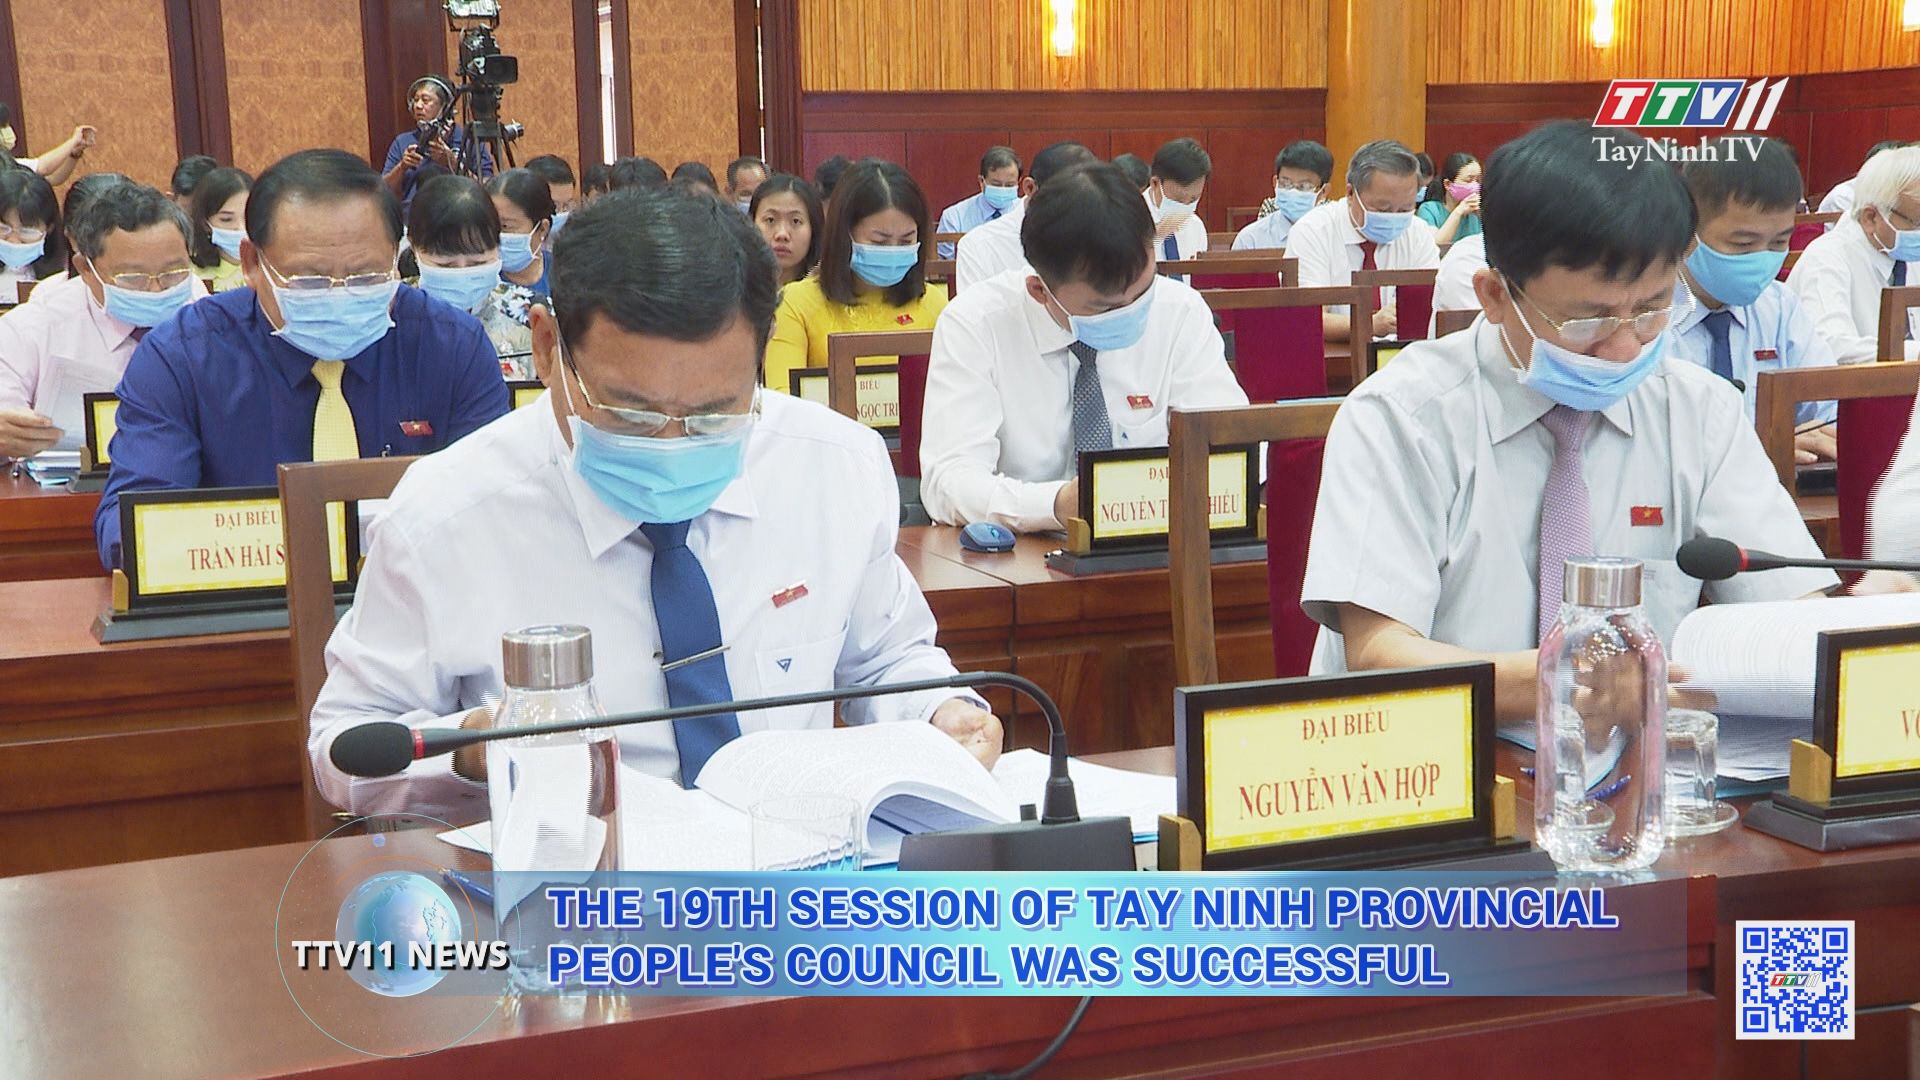 The 19th session provincial people's council of Tay Ninh province was successful | TTVNEWS | TayNinhTV Today